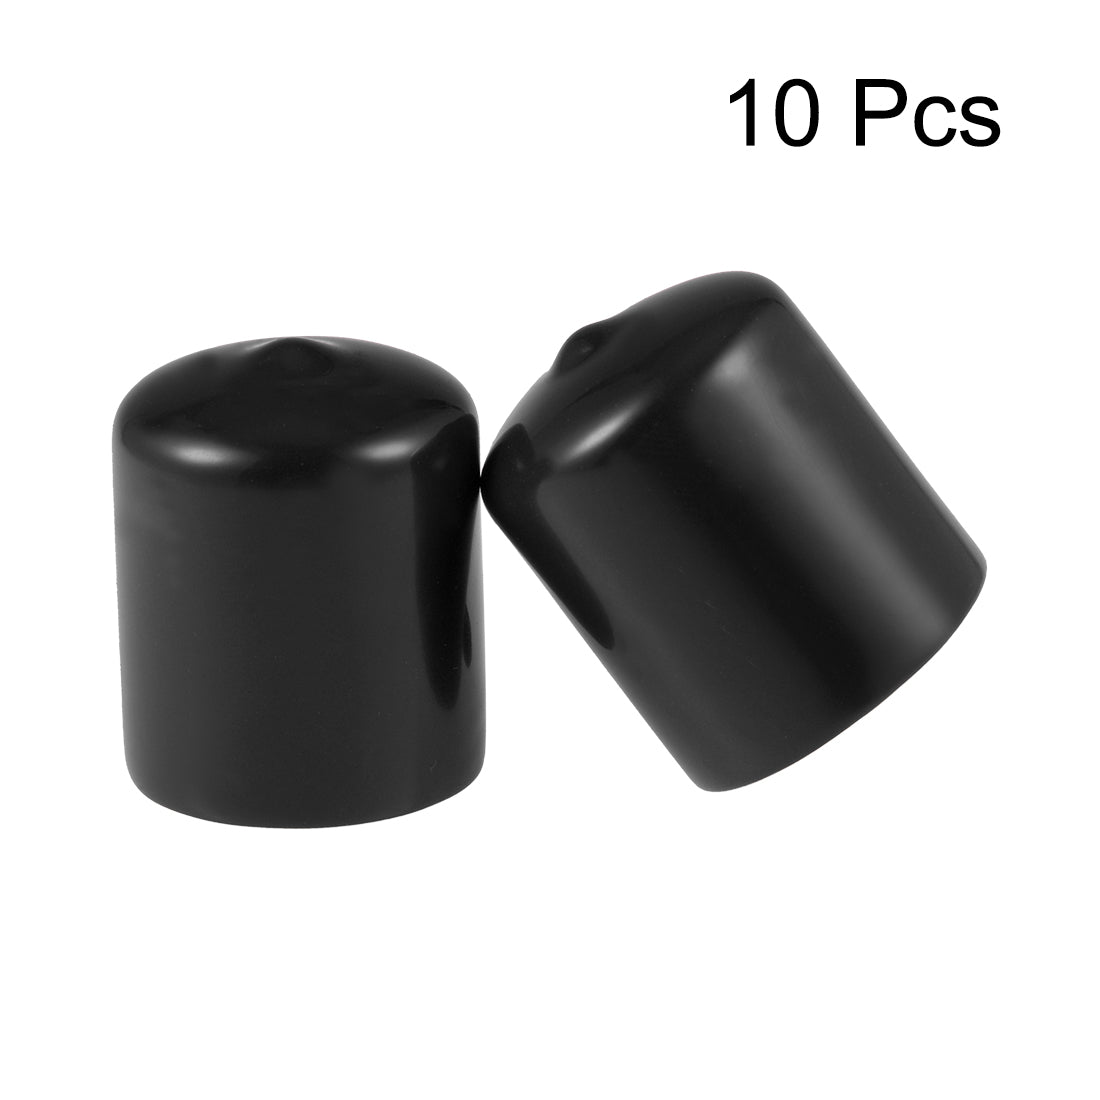 uxcell Uxcell Screw Thread Protector, 28mm ID Round End Cap Cover Black Tube Caps 10pcs